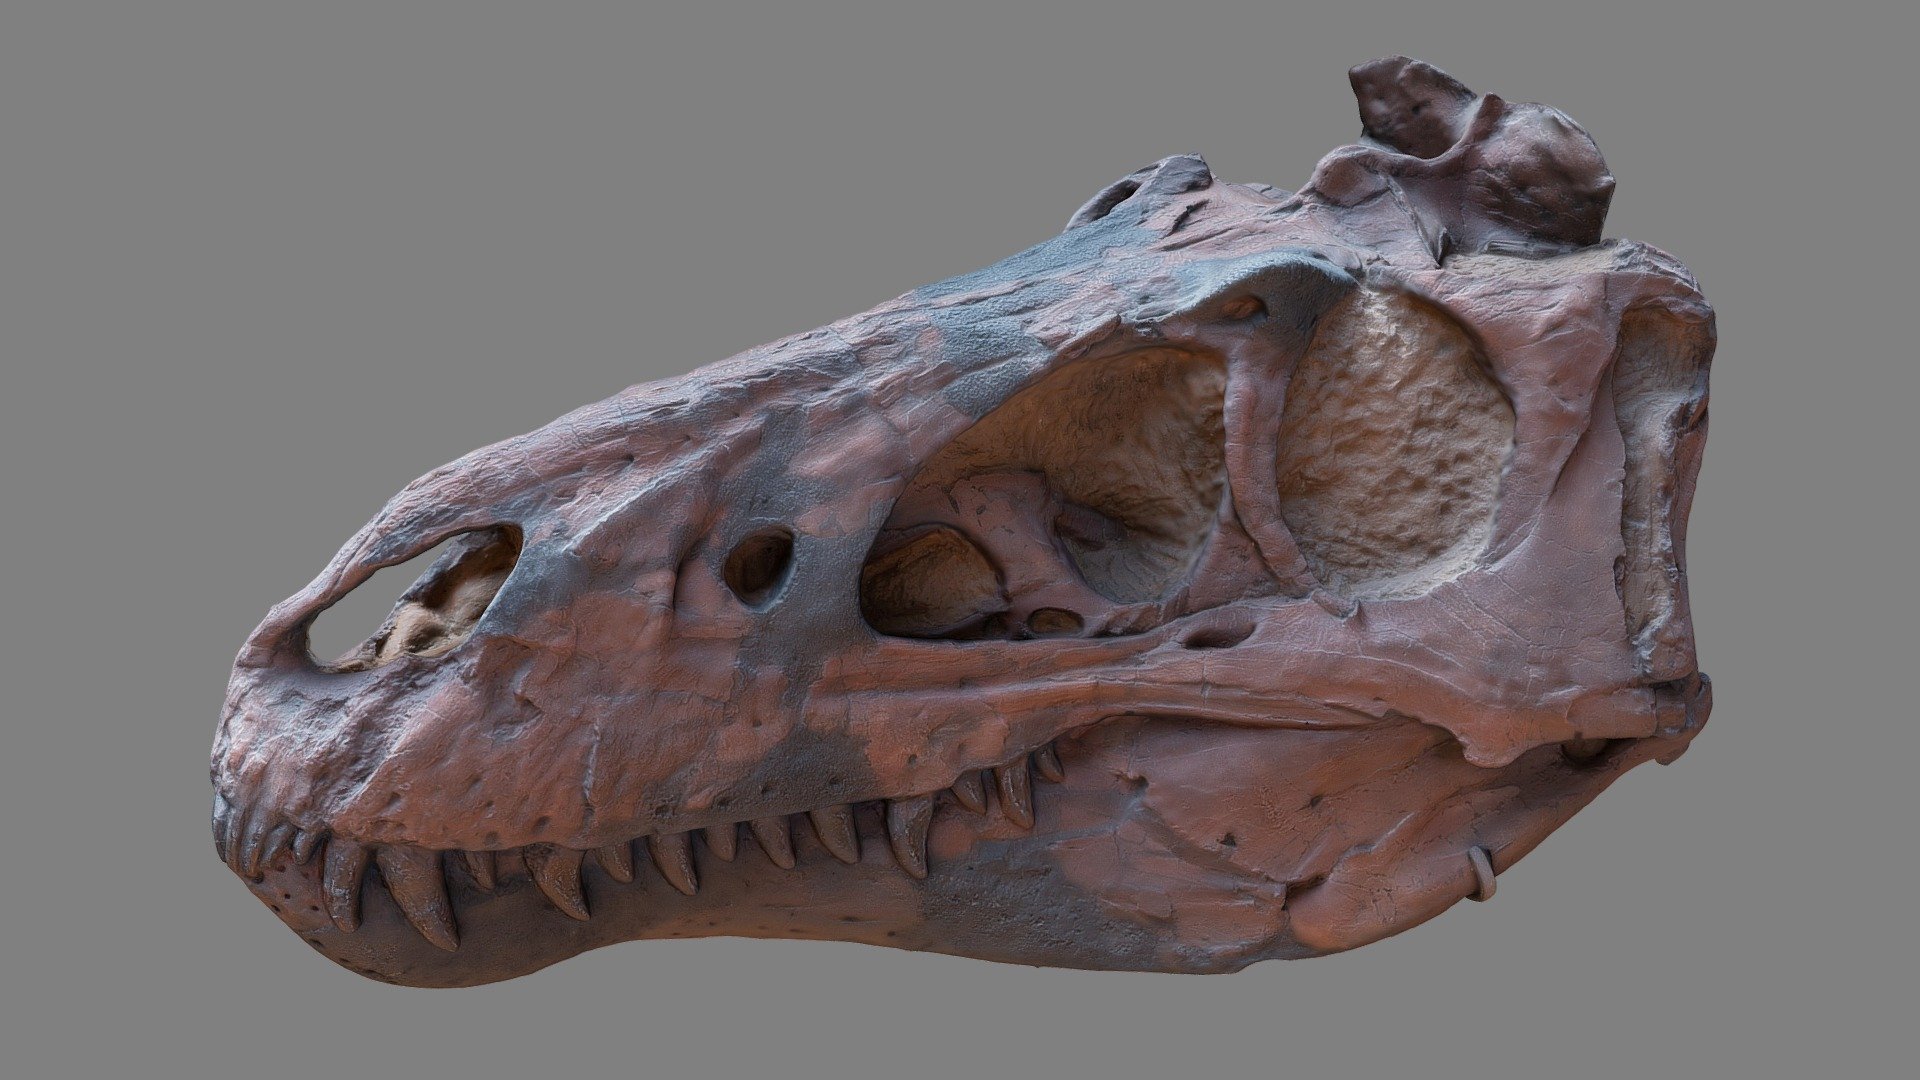 7 years ago, I scanned this Nanotyrannus : https://sketchfab.com/3d-models/nanotyrannus-lancensis-young-t-rex-7b0967fa27674d959647868686b6717b . However, the model was far from perfect.
I figured I would scan it again for the Agisoft Nature Challenge. 

This time, I managed to create a watertight model that should be 3D printable. I also set the number of polygons to 300k on purpose : half the weight of the original model, but with more details ! 

This is a cast of the real fossil of a Nanotyrannus Lancensis found in Gilmore, Montana, in the Hell Creek formation, in 1946. It is about 65 million years old. Scientists used to think Nanotyrannus Lancensis was a species distinct from the famous T-Rex, but recent discoveries tend to show that a nanotyrannus is actually a young T-Rex.

You might ask yourself why the skull is not symmetrical : this deformation occured during the fossilization process.

3D scanned at the Museum d'Histoire Naturelle, Paris, France 3d model